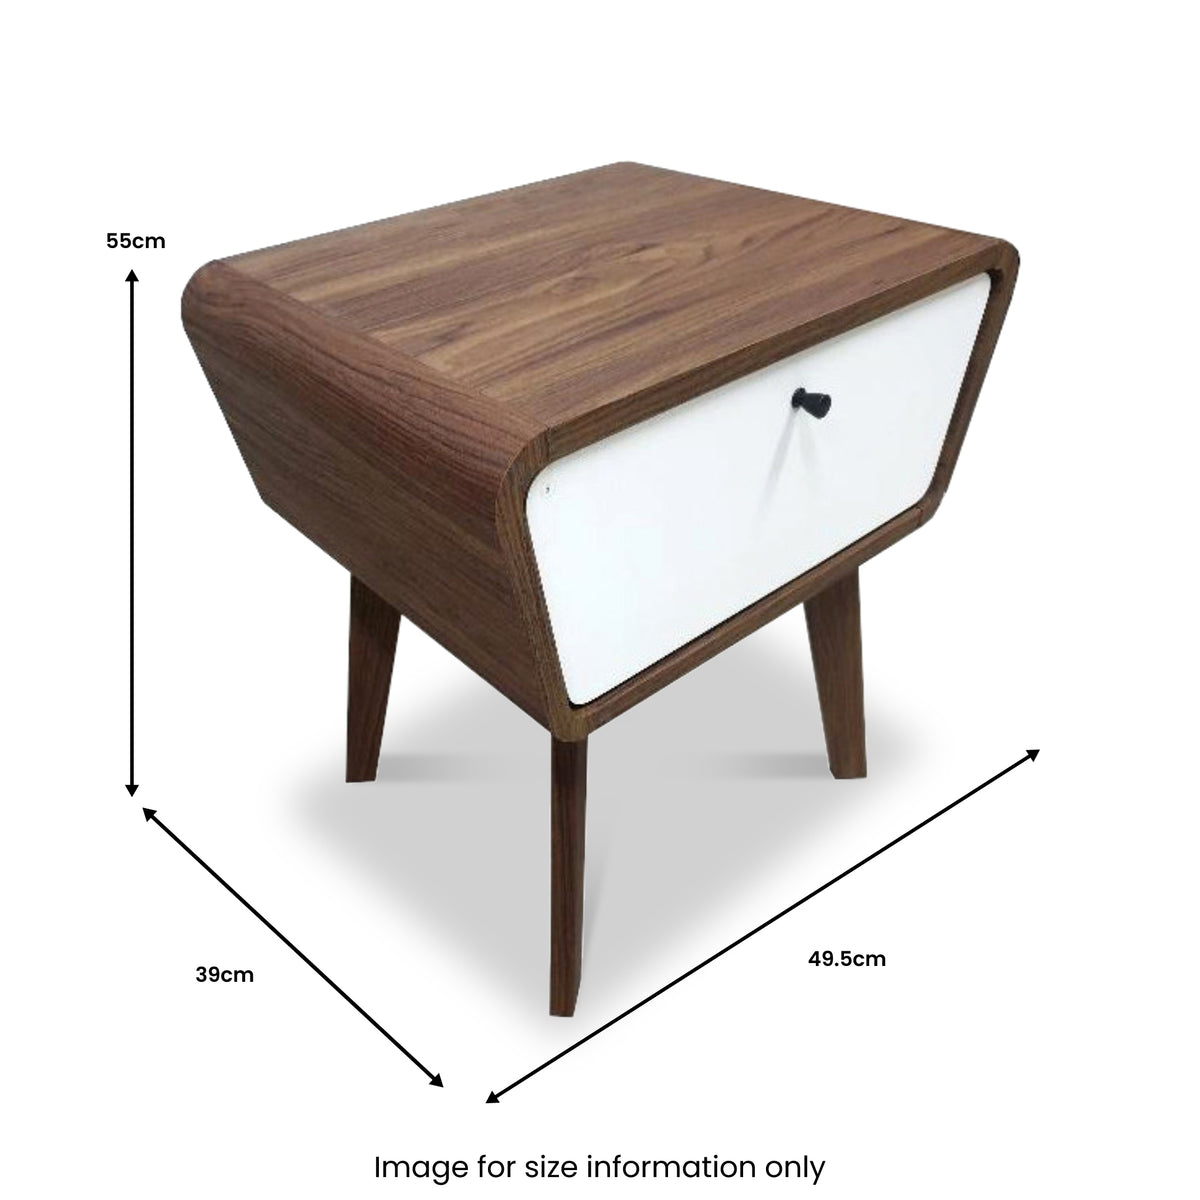 Dillon Side Table with Storage dimensions